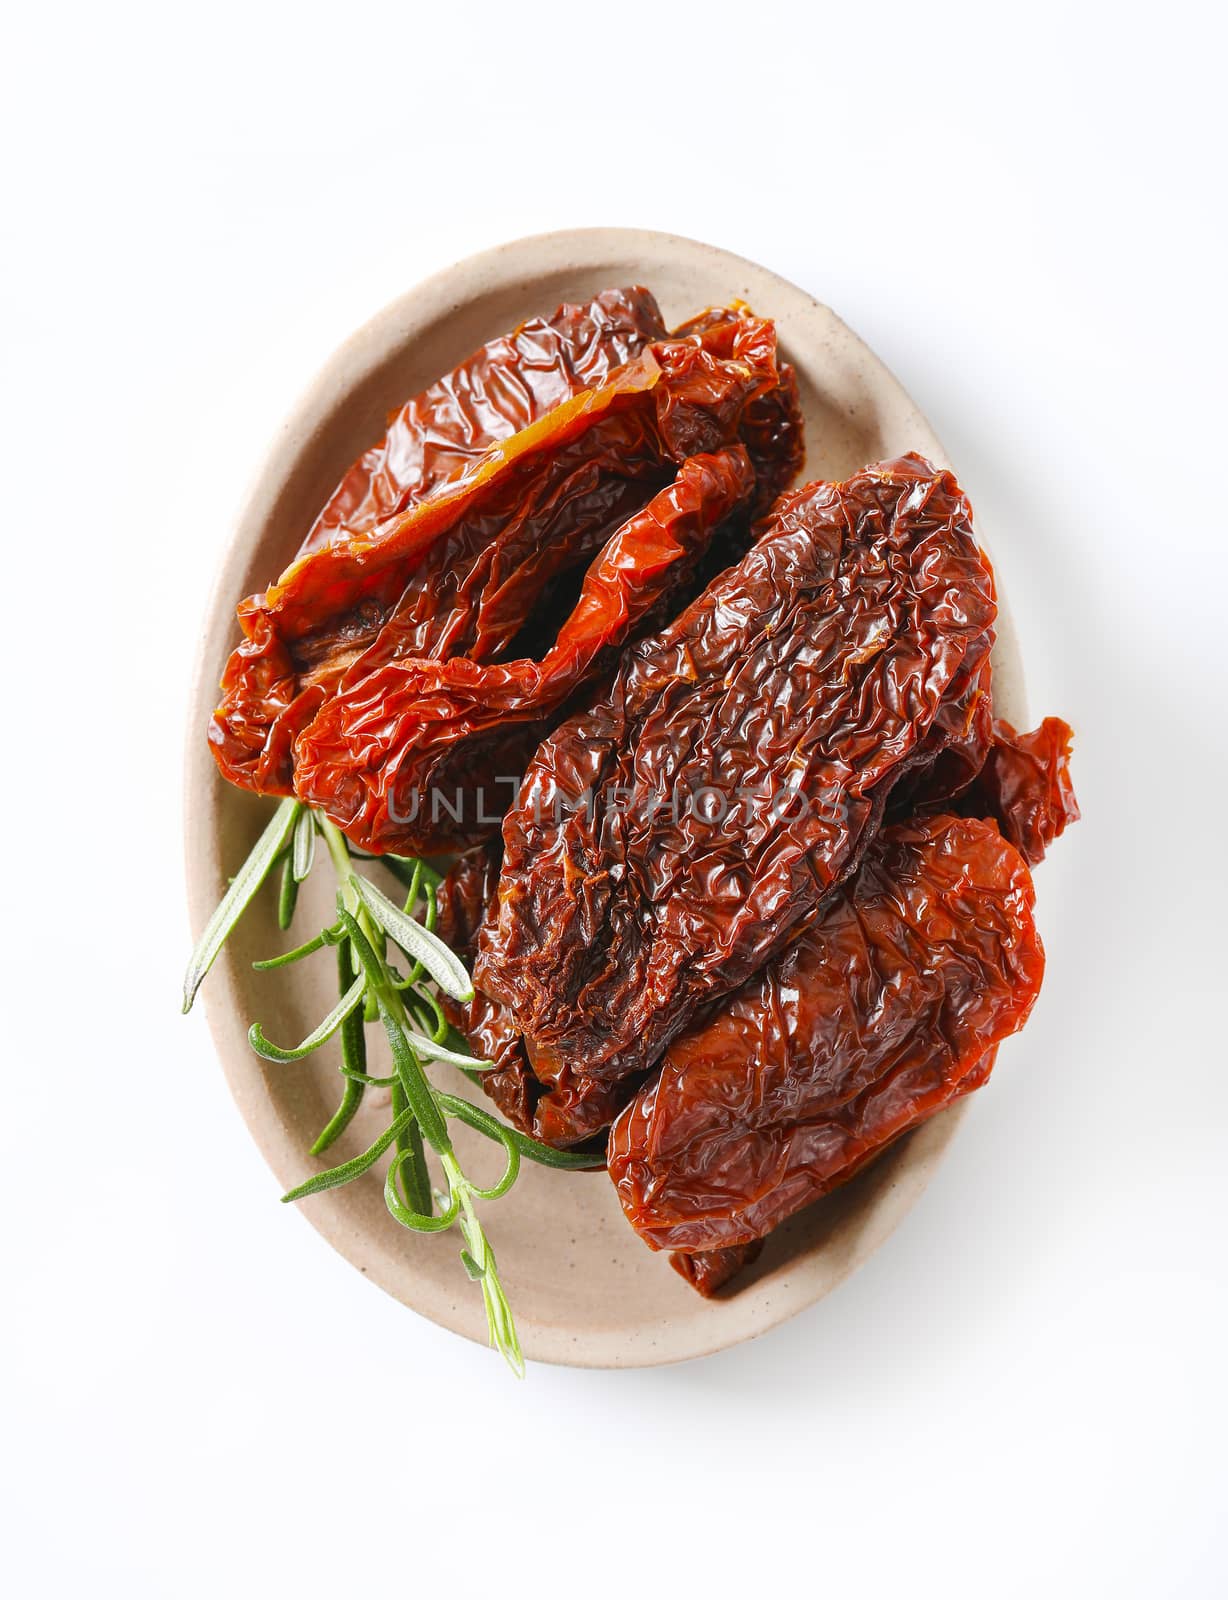 plate of sun dried tomatoes with rosemary on white background